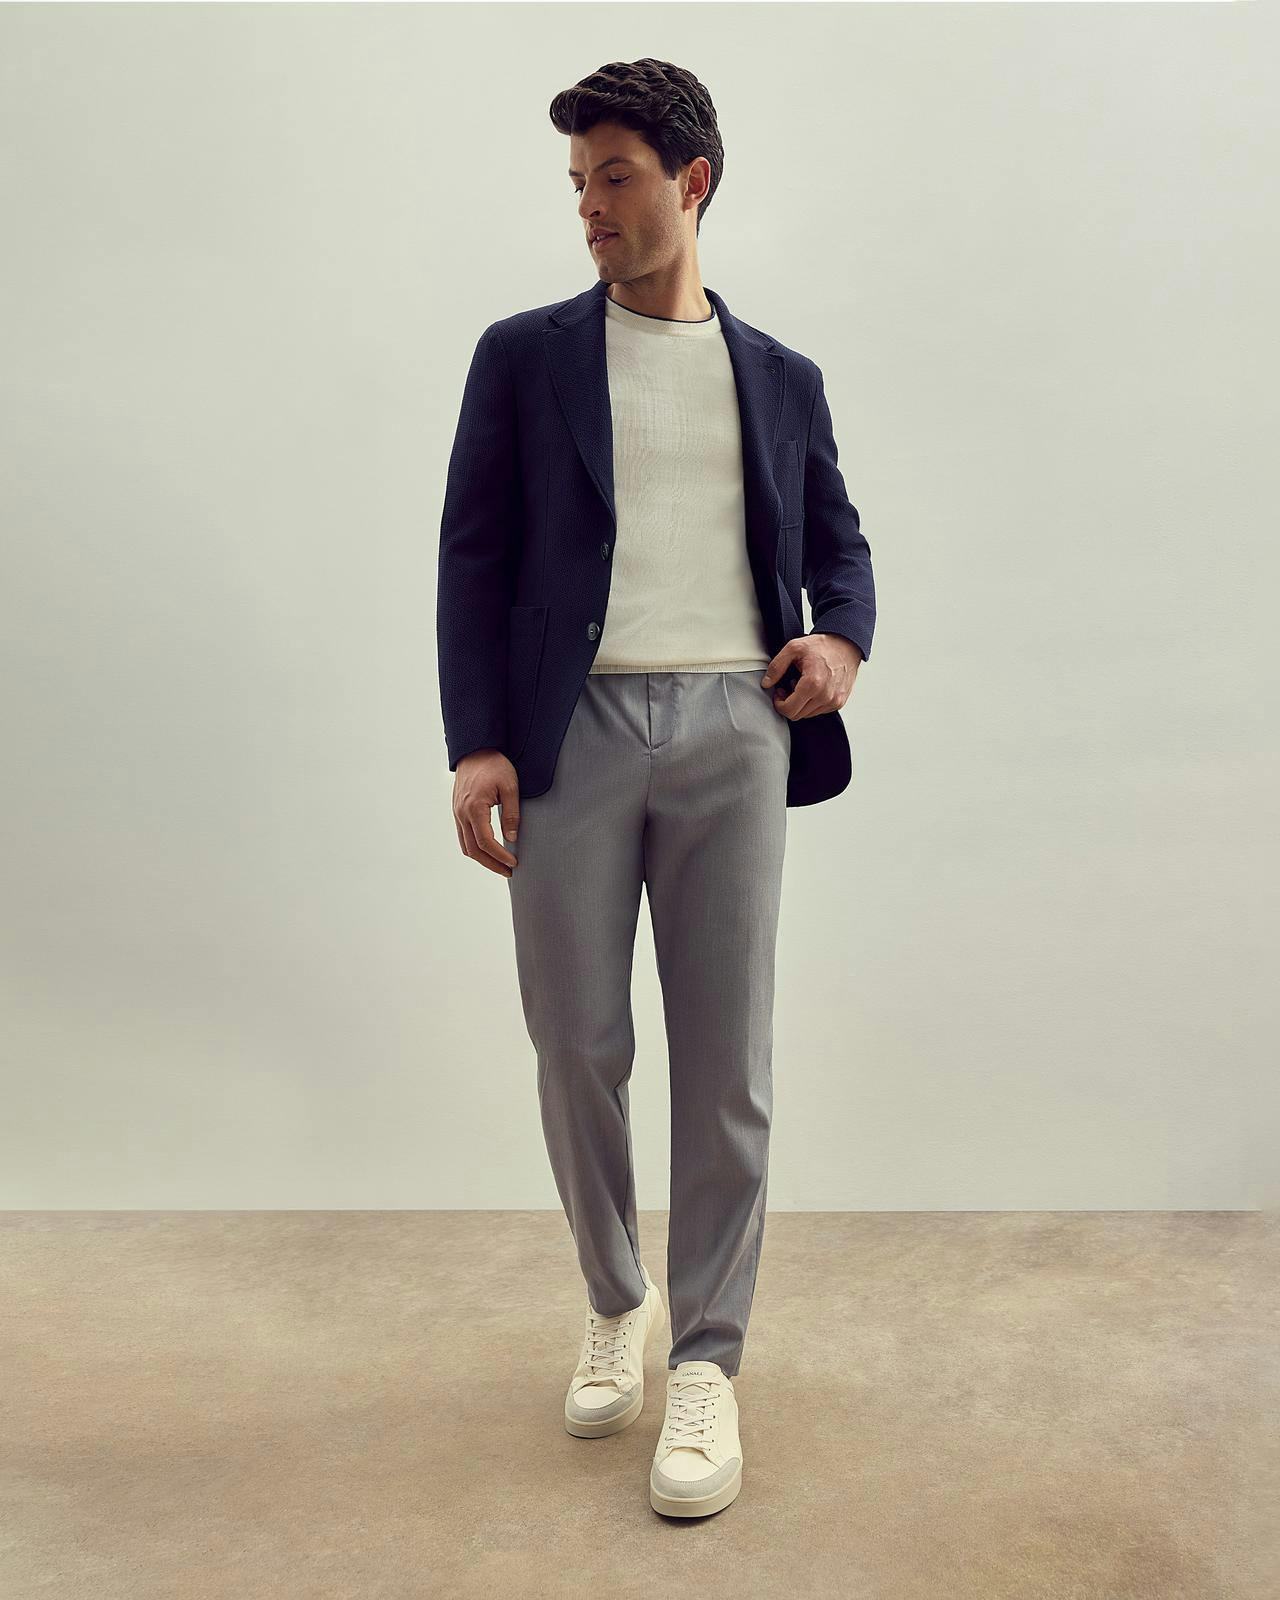 a male model in grey pants, a white t-shirt and a navy sports jacket